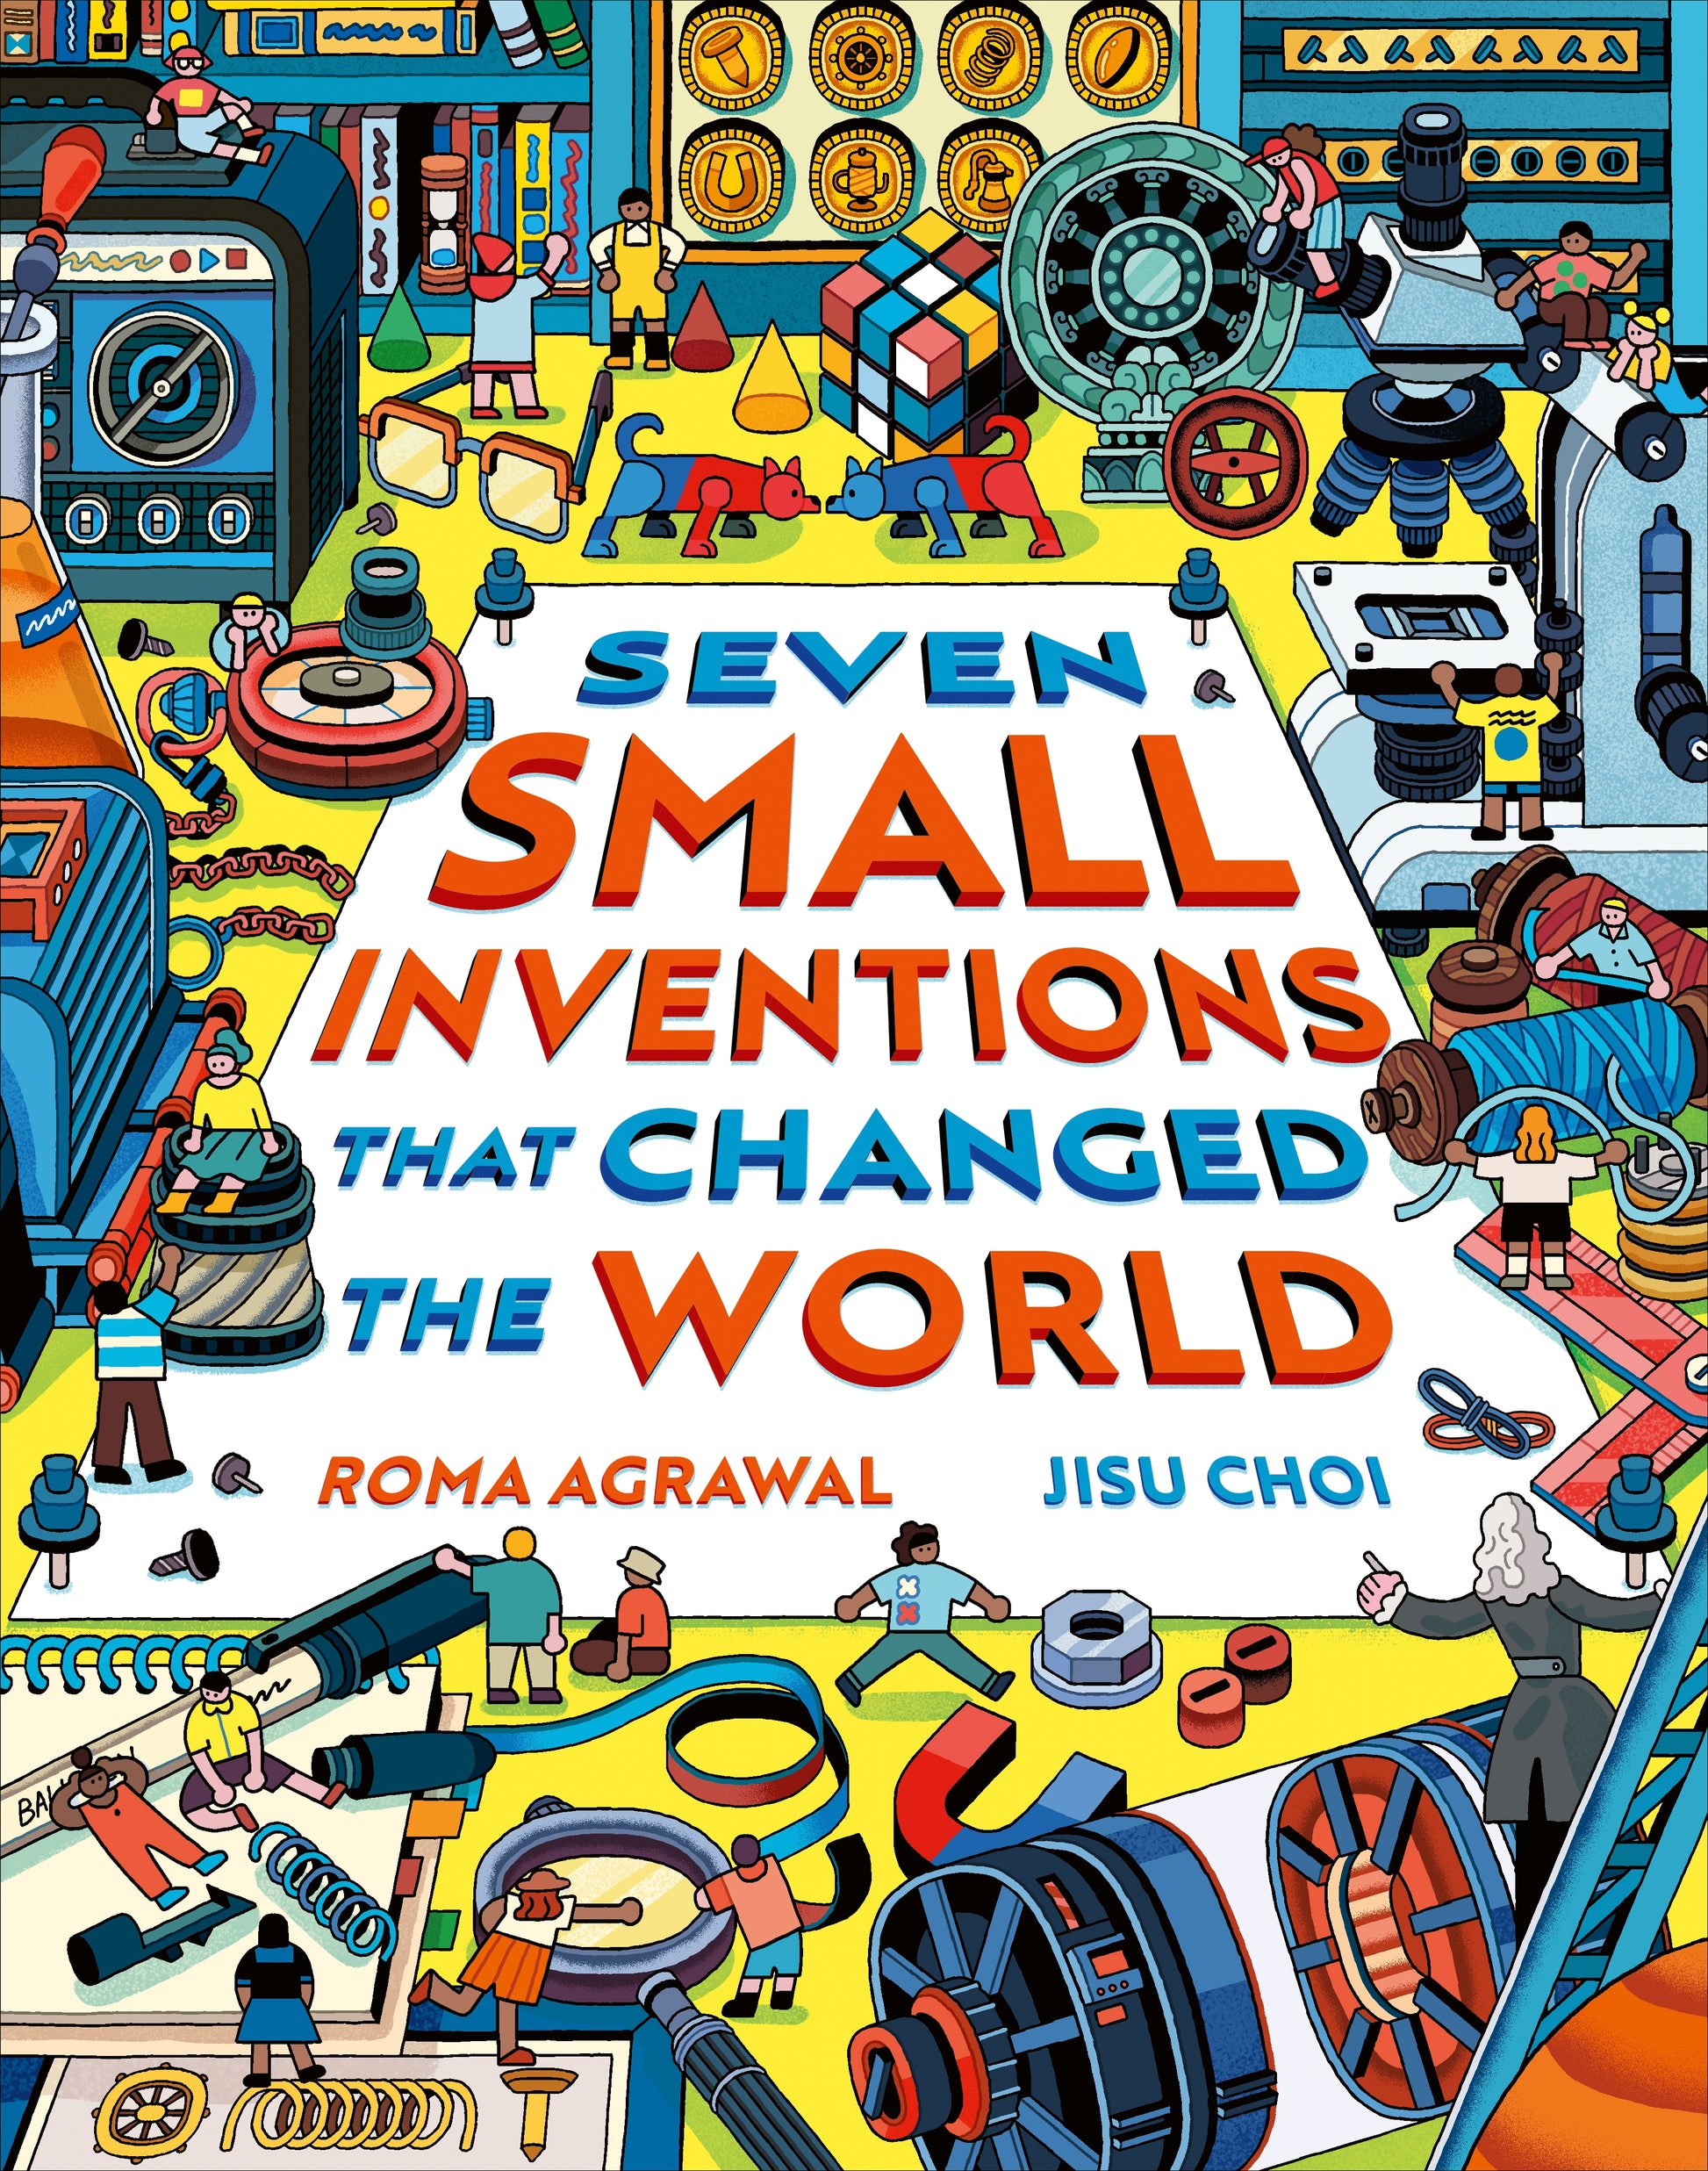 Seven Small Inventions that Changed the World by Roma Agrawal, Jisu Choi